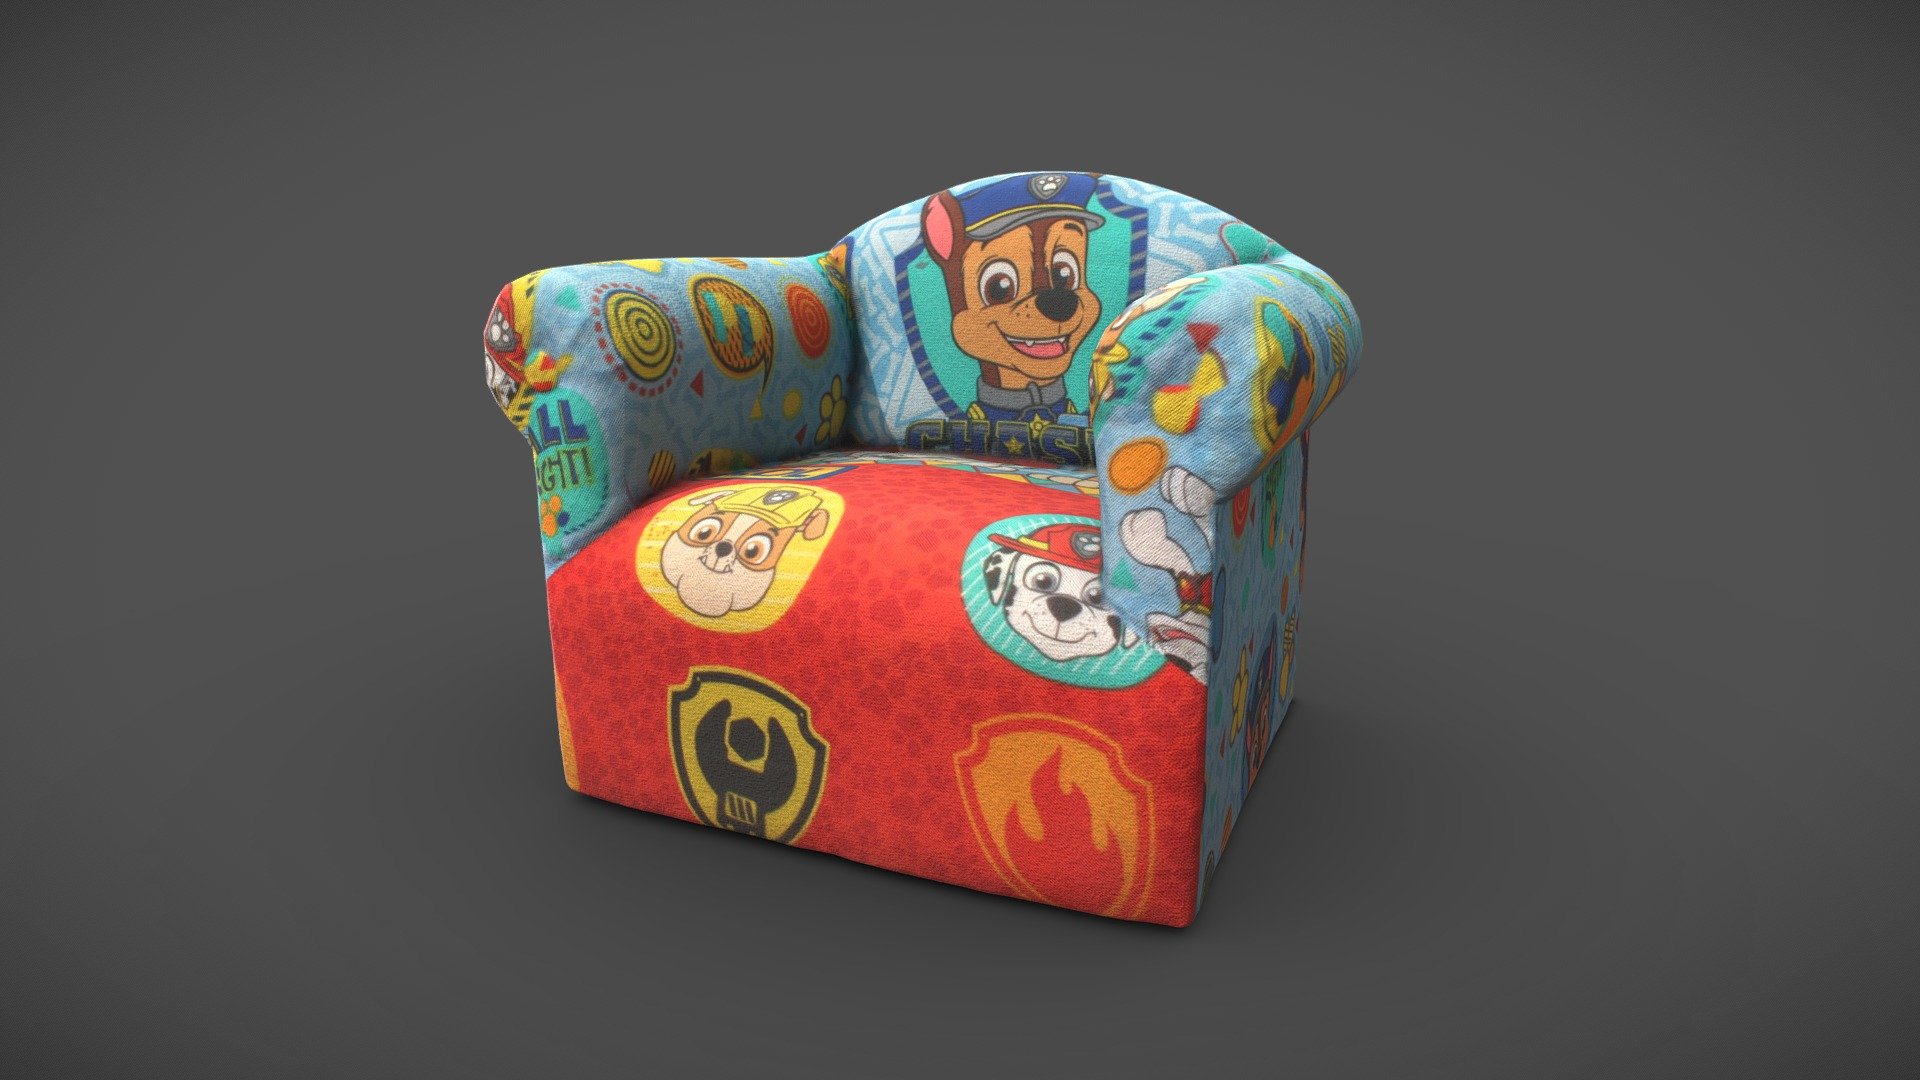 Metashape - Zbrush - Substance Painter / 60 images capture.
2 Studio flash at 1/2 power and bounced light around.
Canon 18mm - Child Chair - 3D model by diegoev 3d model